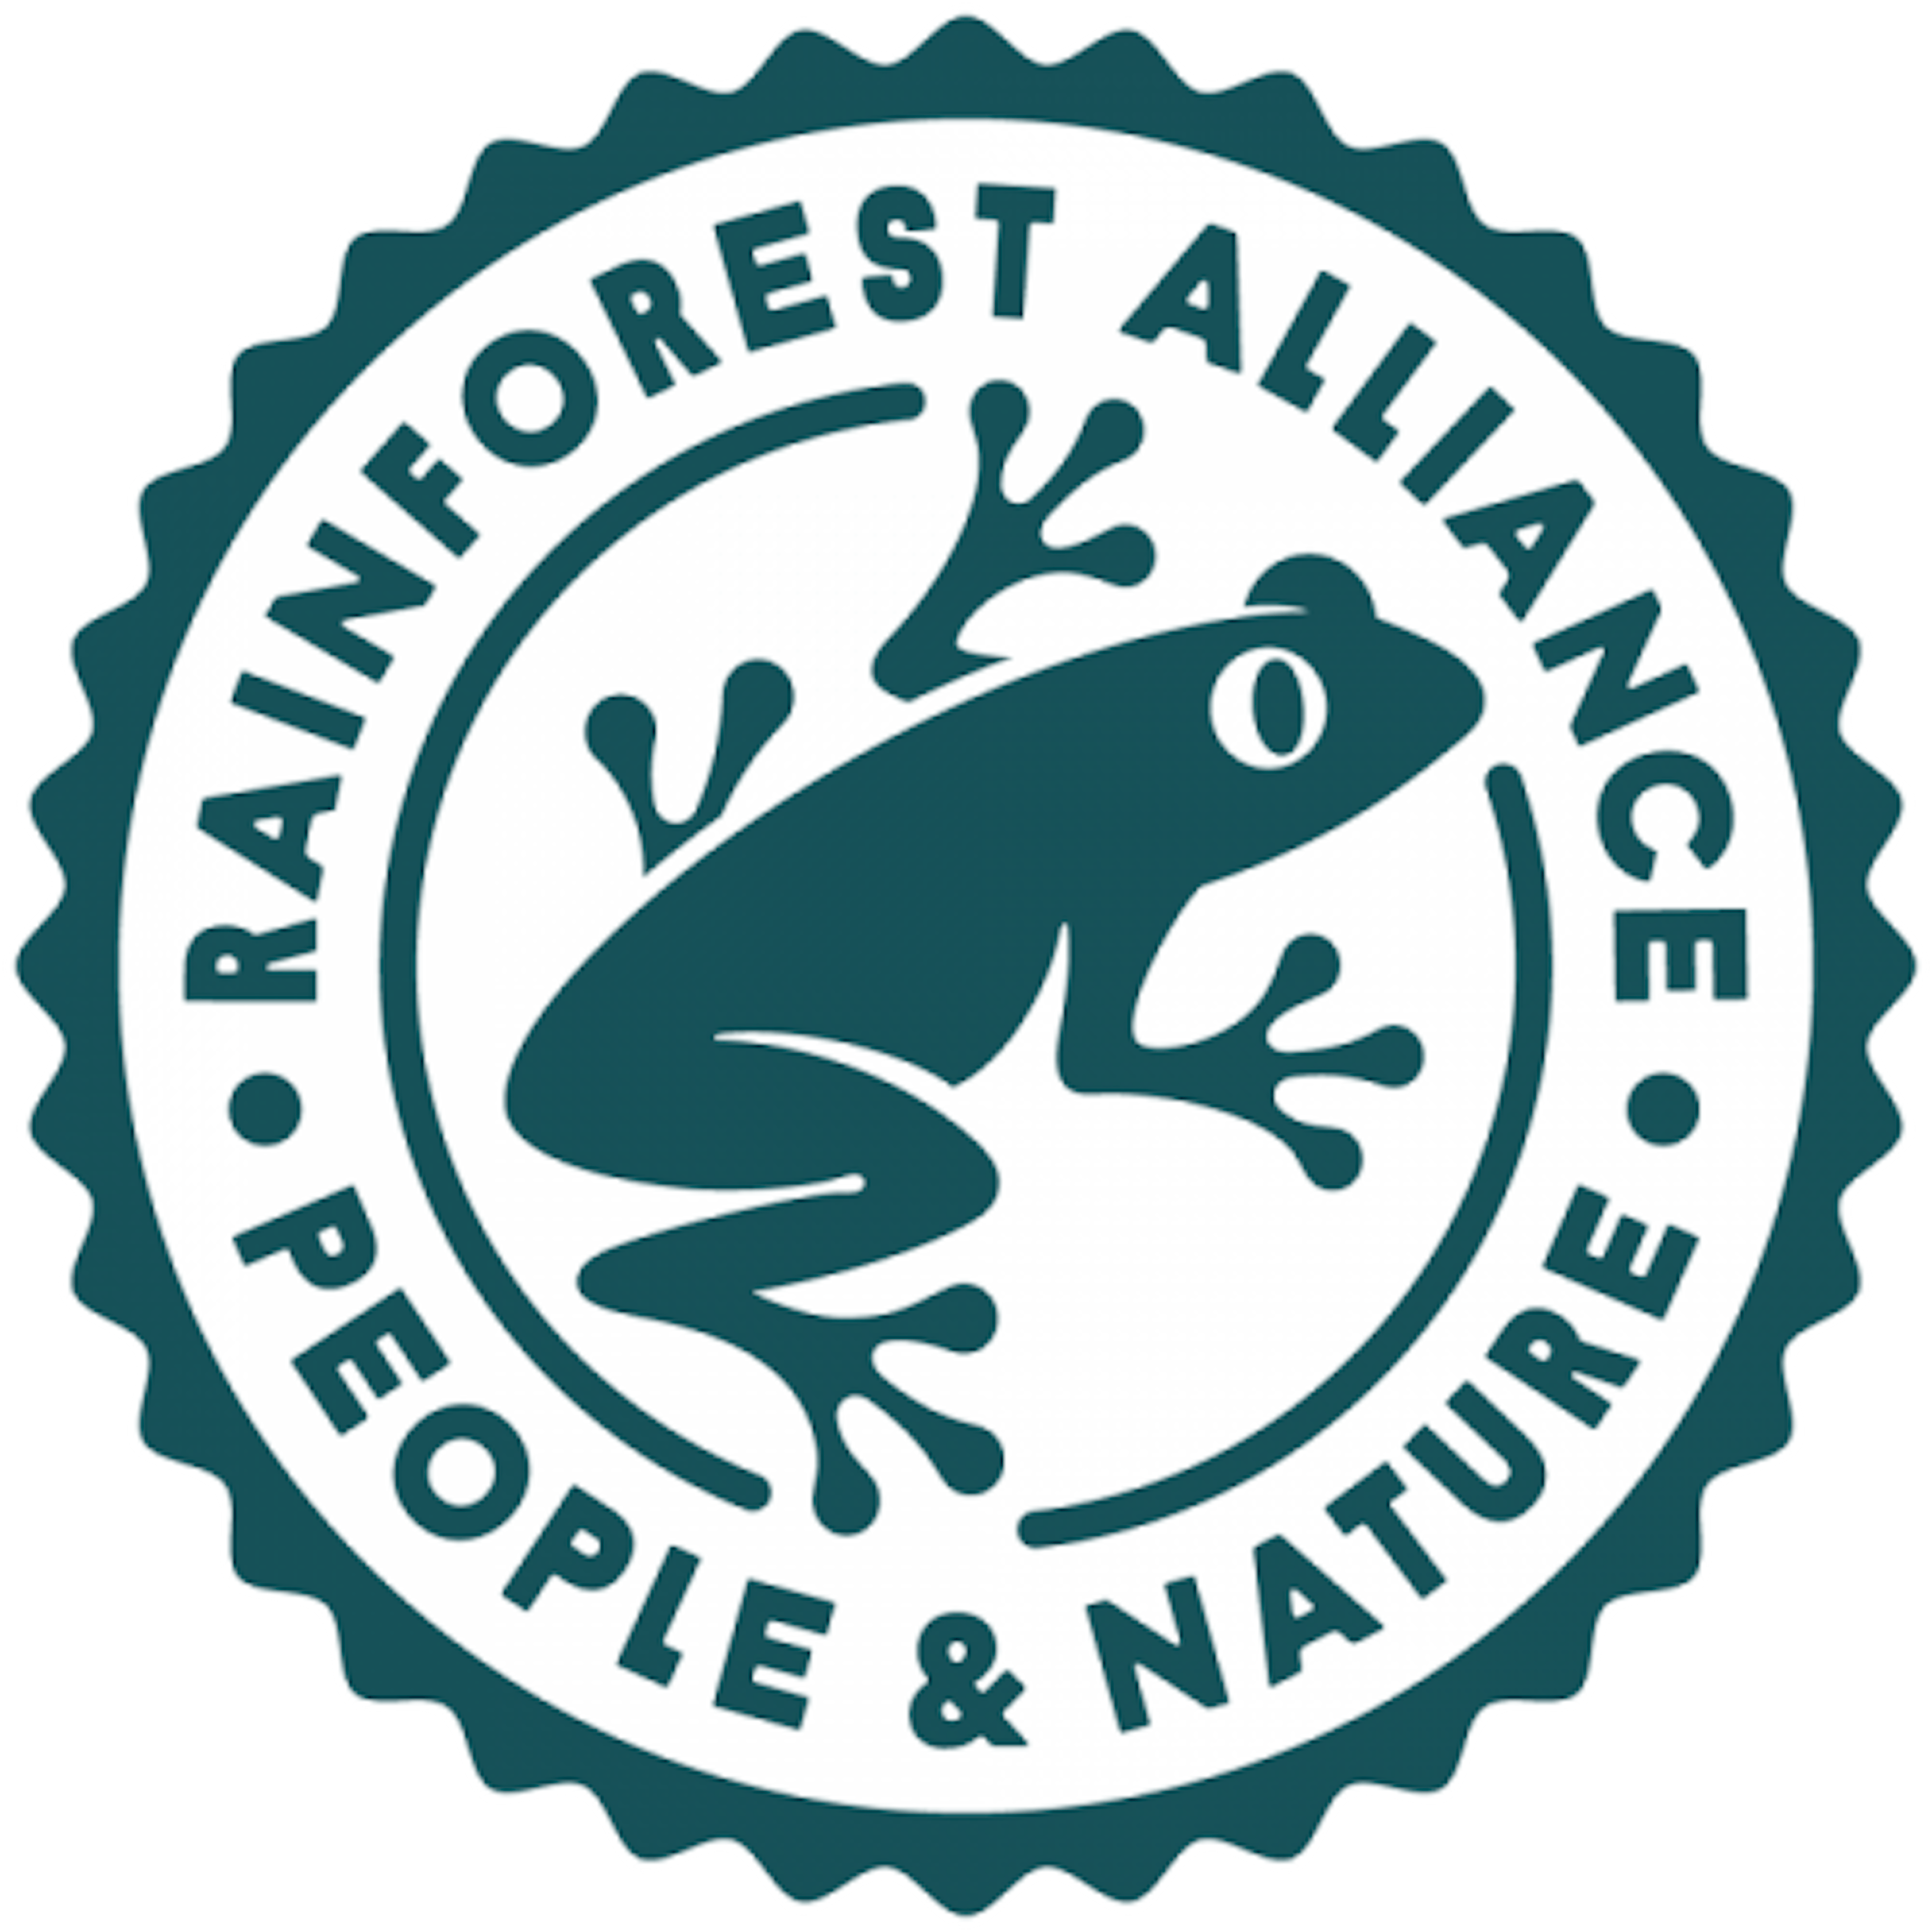 The "Rainforest Alliance Certified" Badge